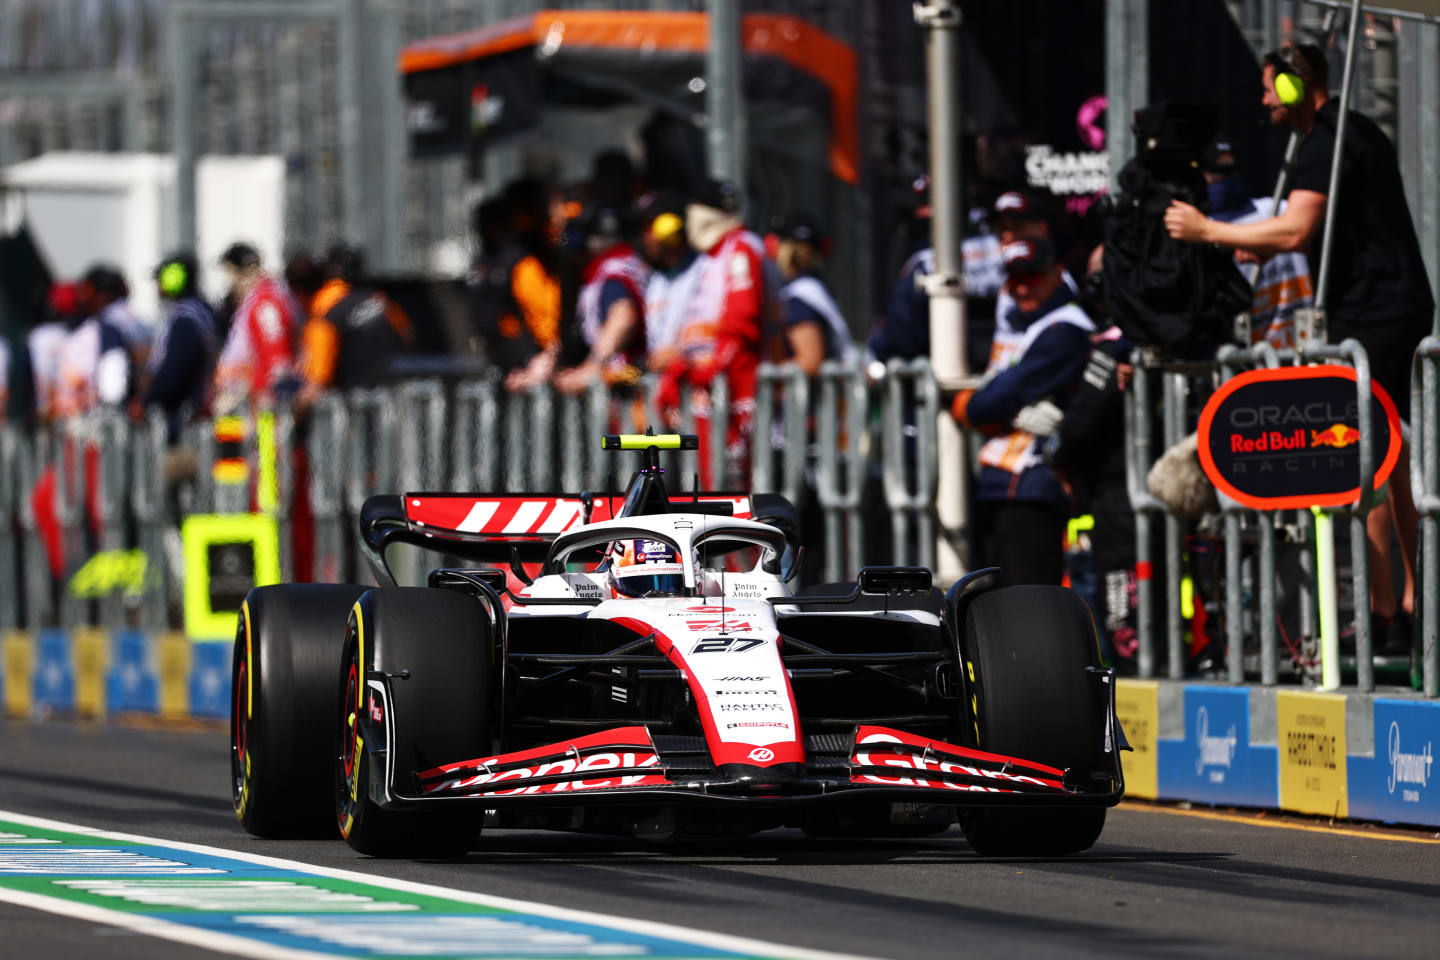 MELBOURNE, AUSTRALIA - MARCH 31: Nico Hulkenberg of Germany driving the (27) Haas F1 VF-23 Ferrari in the Pitlane during practice ahead of the F1 Grand Prix of Australia at Albert Park Grand Prix Circuit on March 31, 2023 in Melbourne, Australia. (Photo by Dan Istitene - Formula 1/Formula 1 via Getty Images)